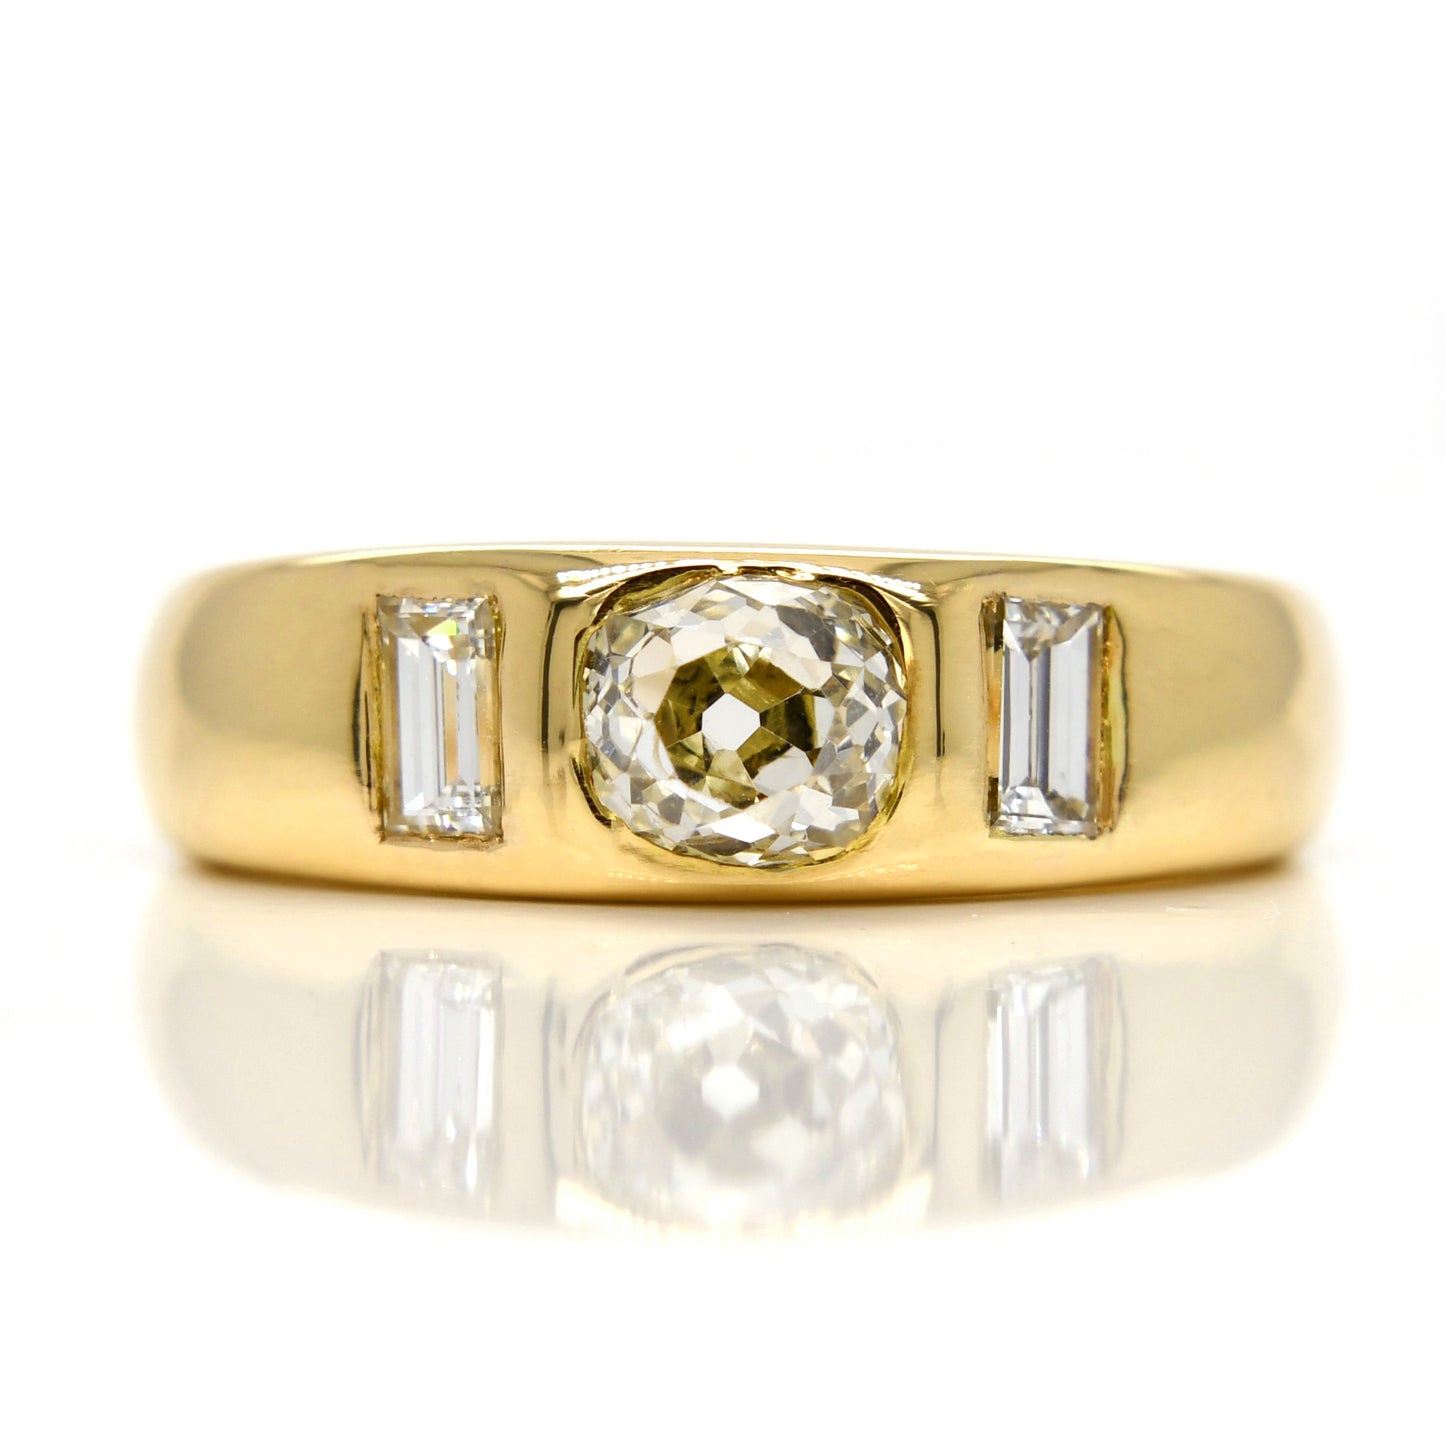 1.23ct old mine and baguette cut diamond band ring